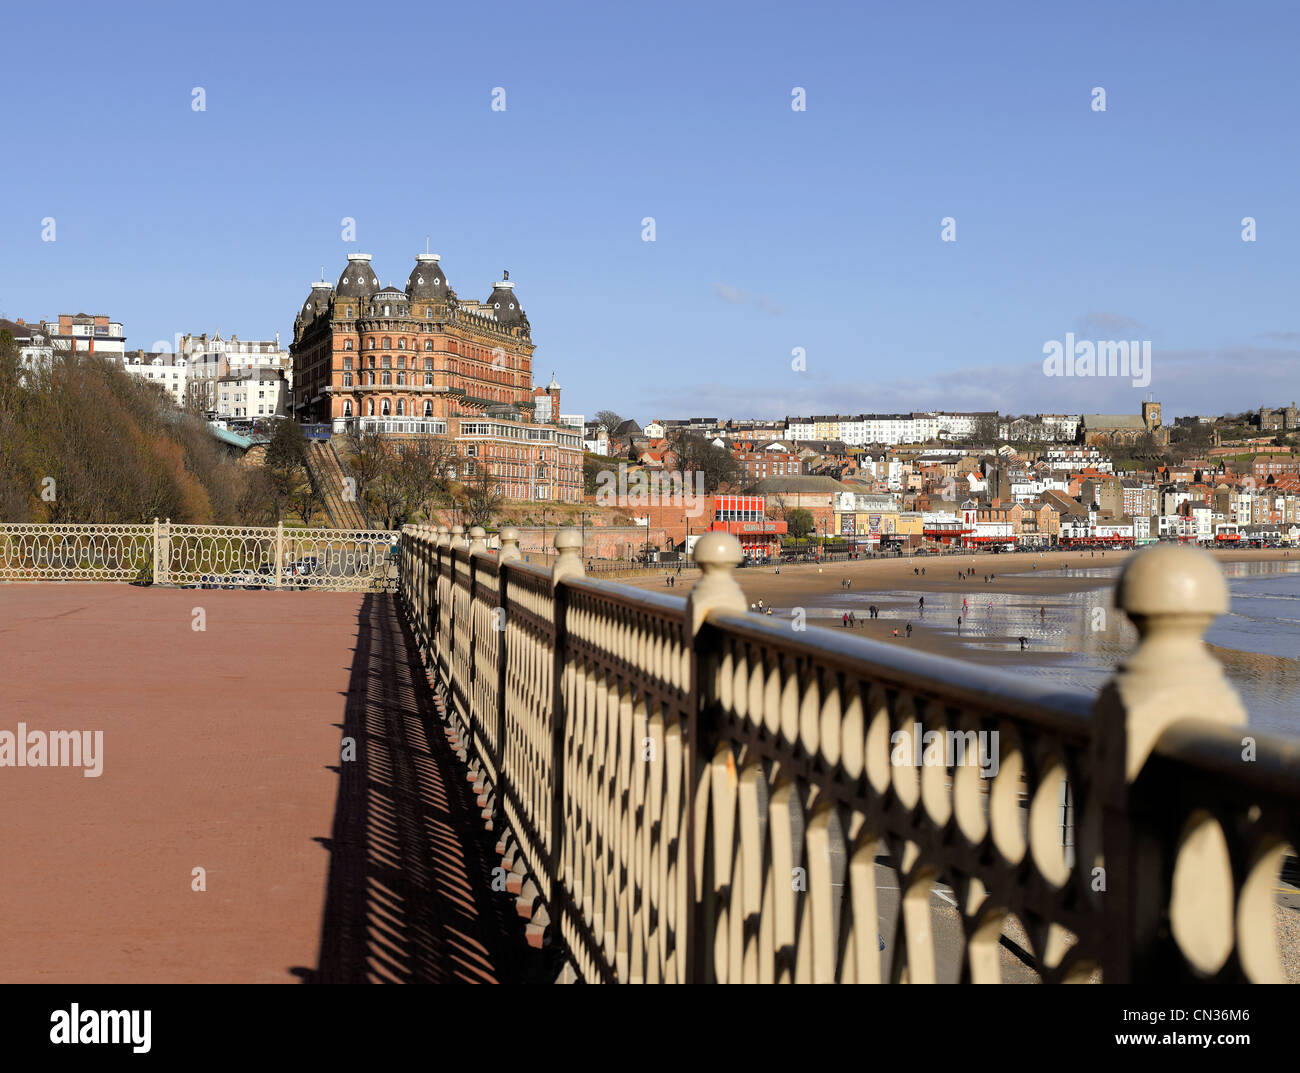 The Grand Hotel and South Bay viewed from the Spa in winter Scarborough North Yorkshire England UK United Kingdom GB Great Britain Stock Photo